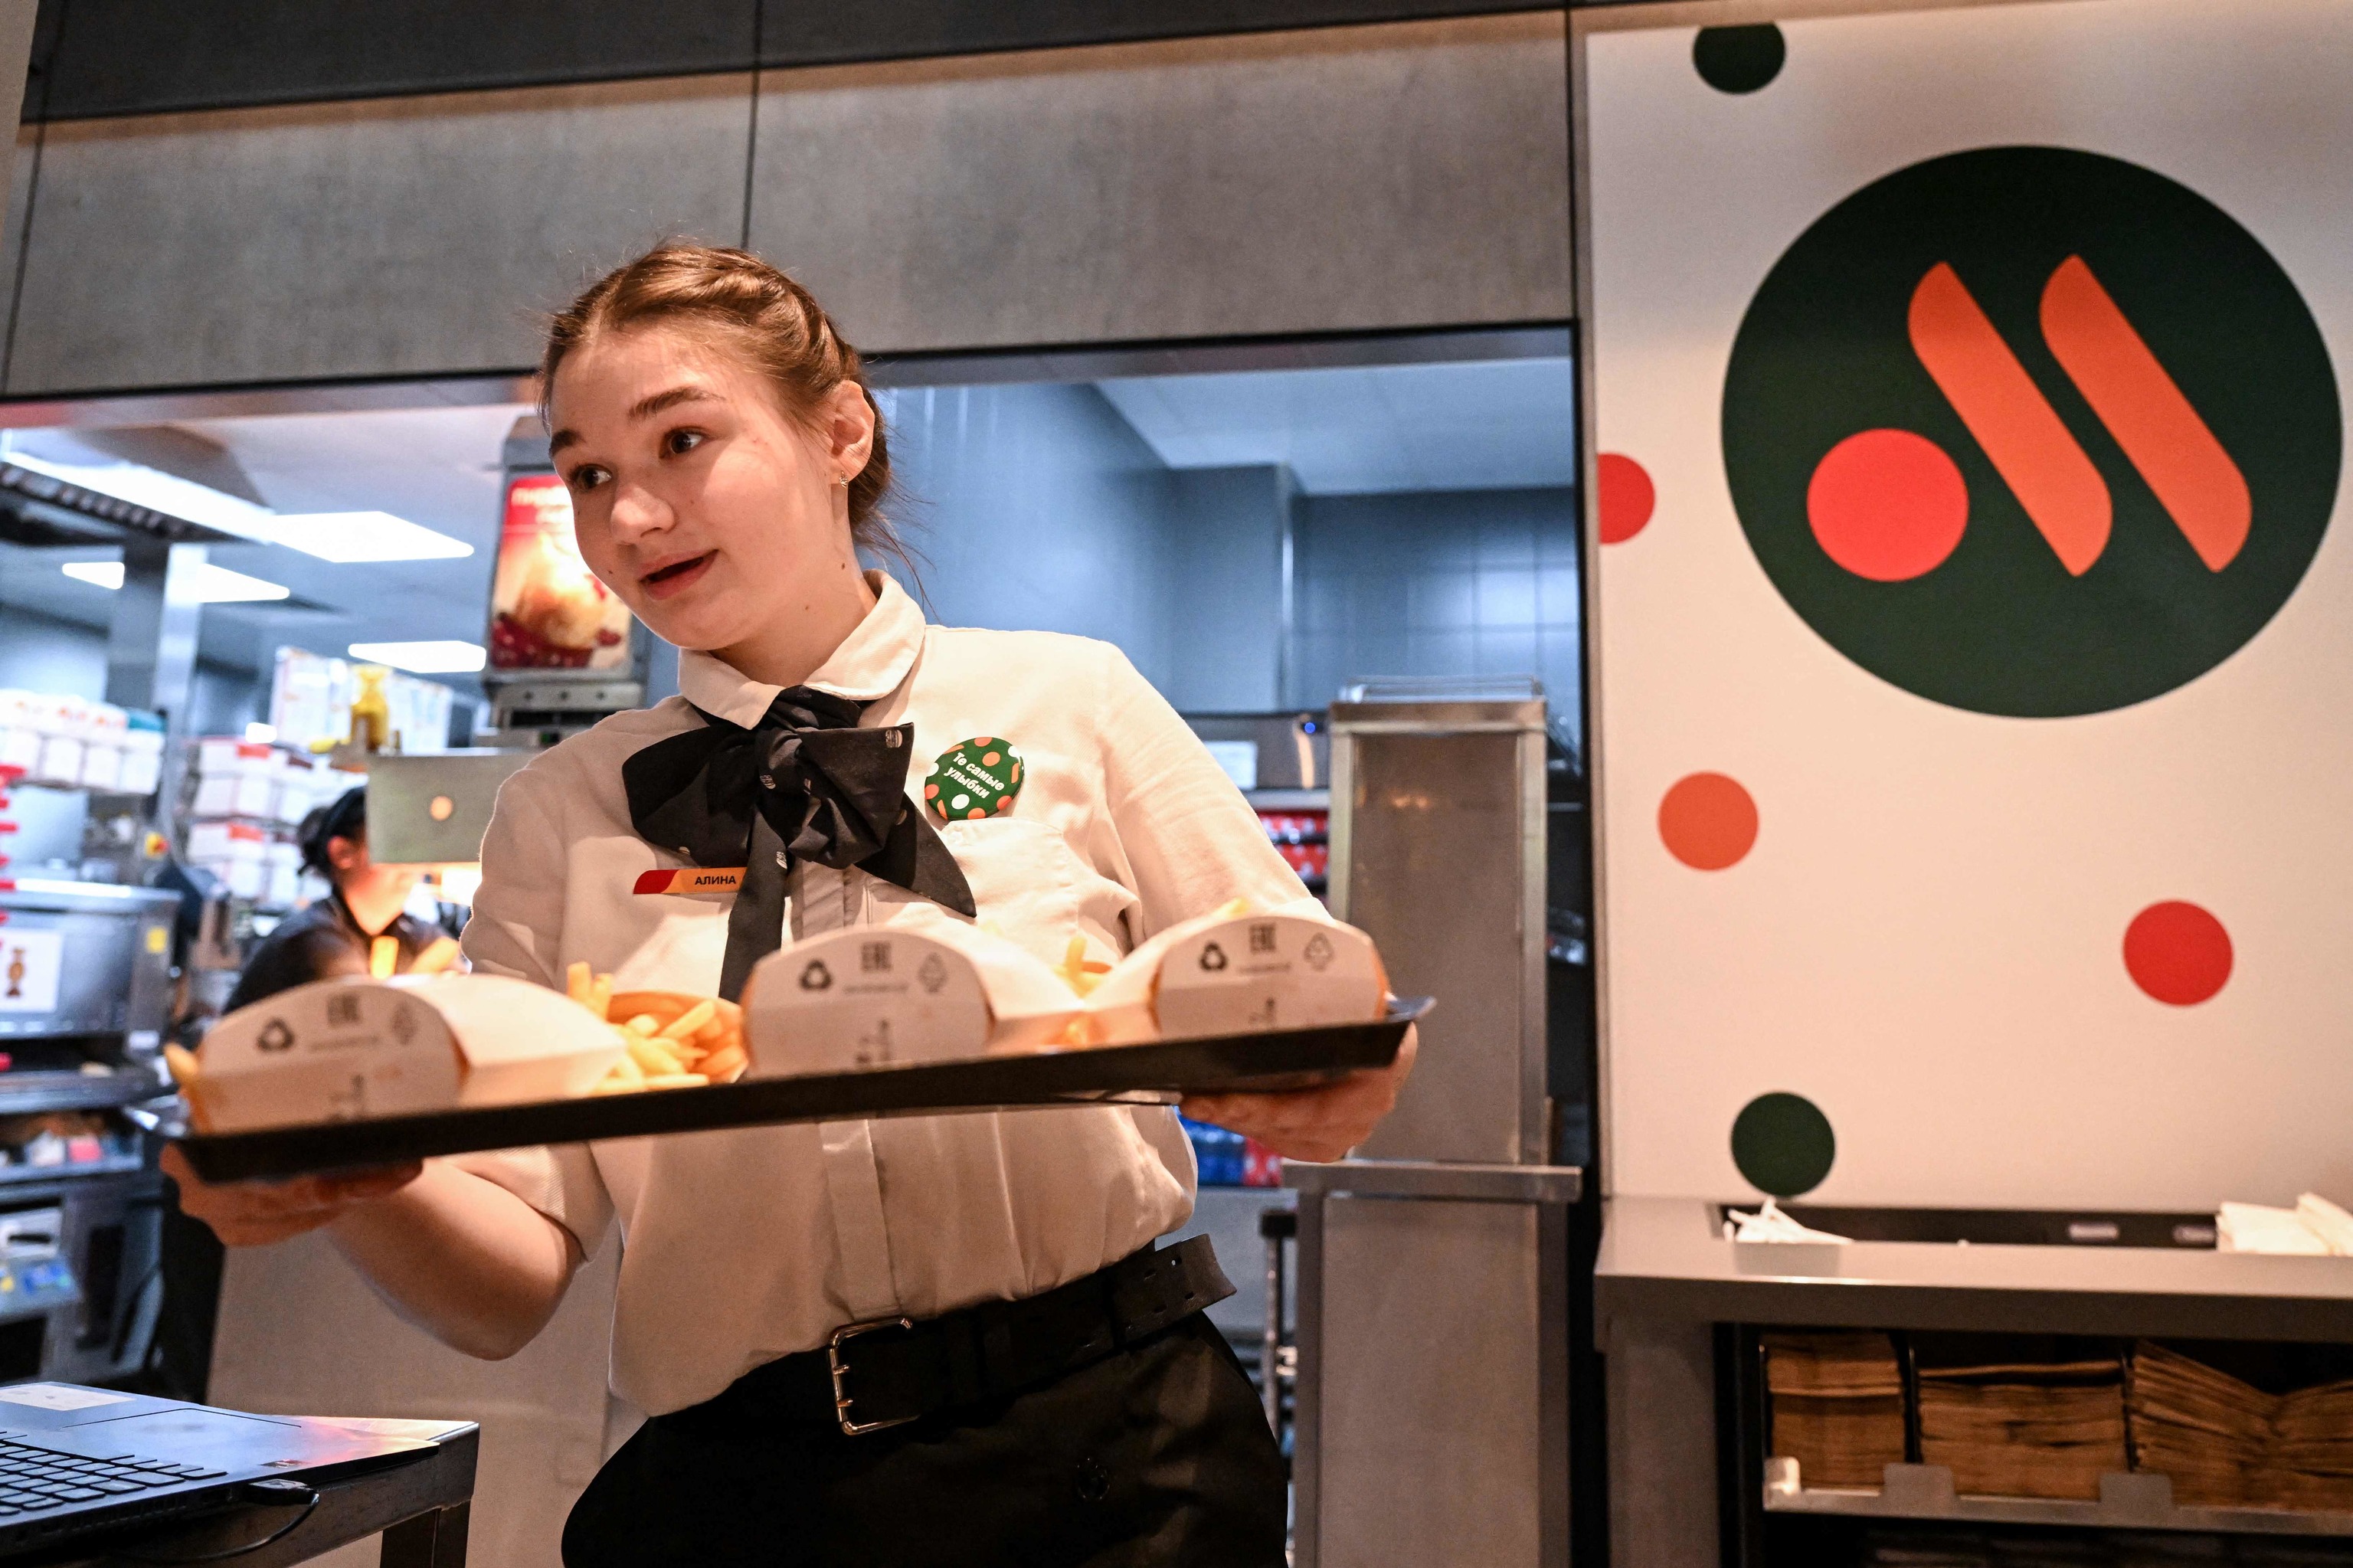 An employee opened today at an establishment that replaced McDonald's in Moscow